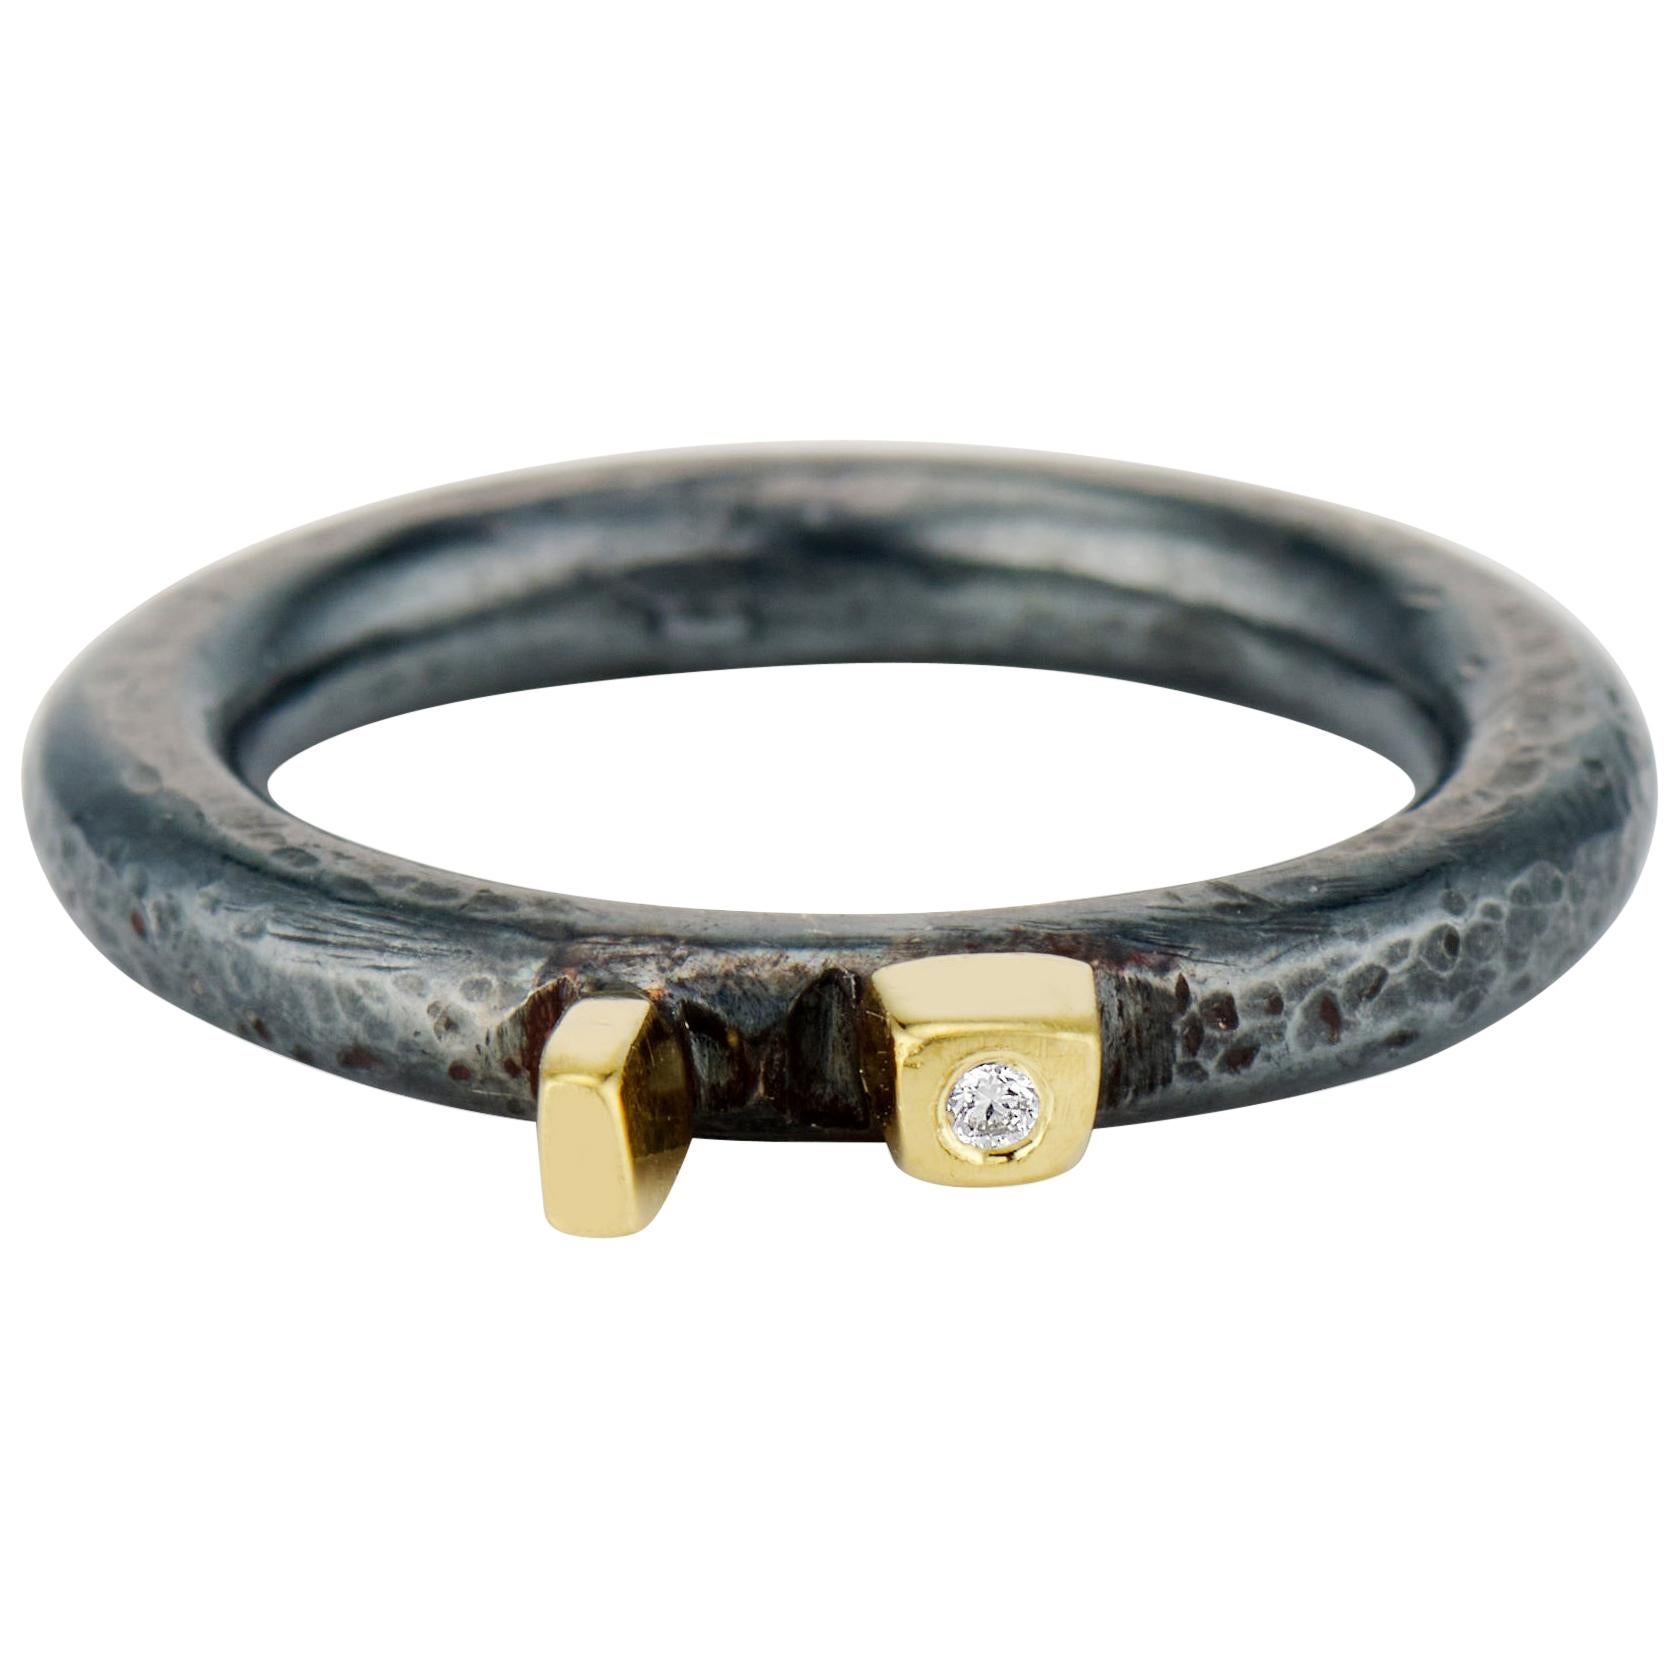 Contemporary Oxidized Sterling Silver, Yellow Gold and Diamond Cubist Band Ring